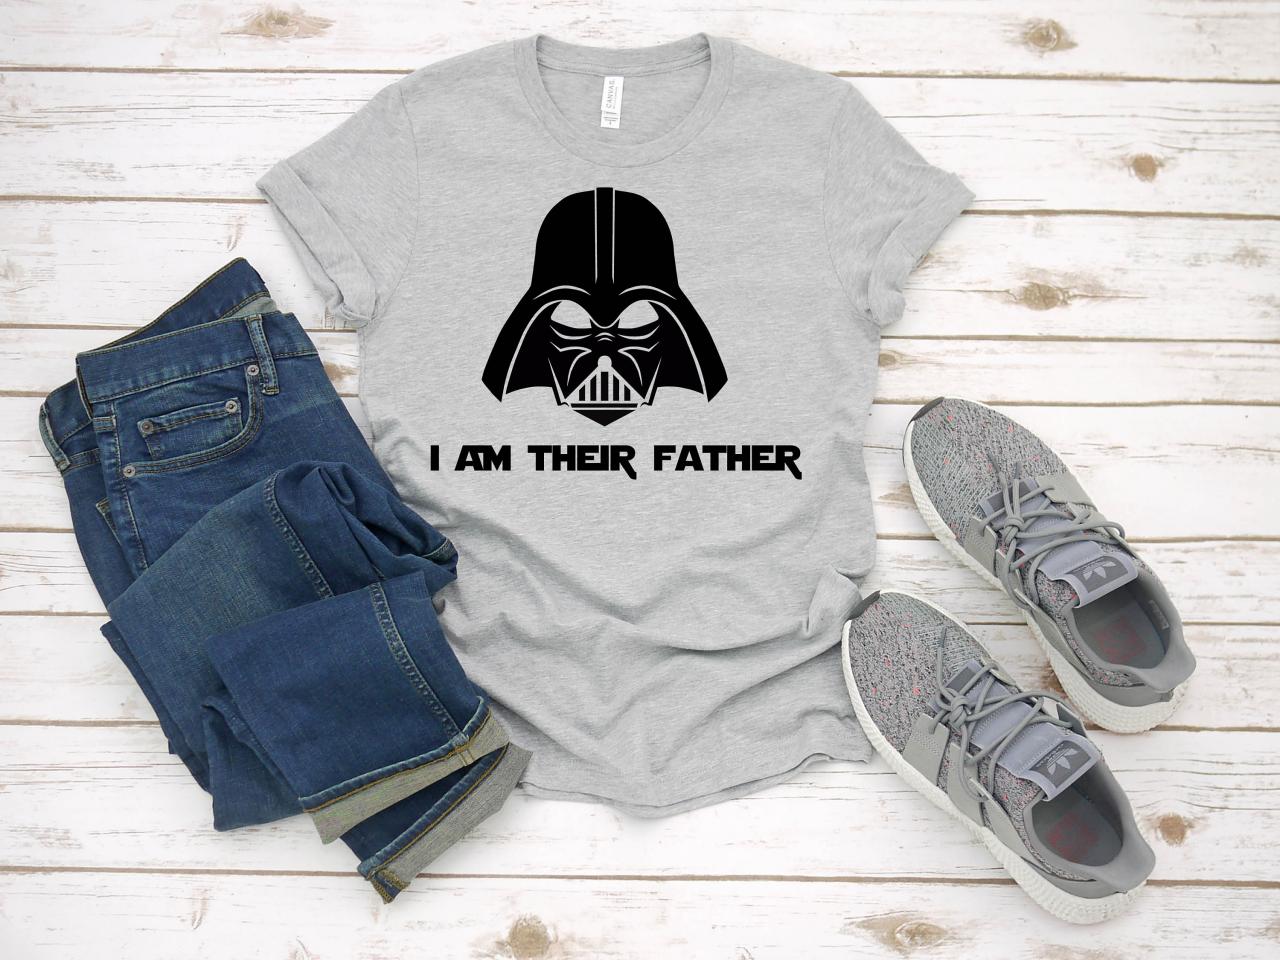 T-shirt For Men | I Am Their Father T-shirt| Darth Vader| Star Wars| Daddy Shirt| Father's Day Gift| Men's Gift| Daddy Gift